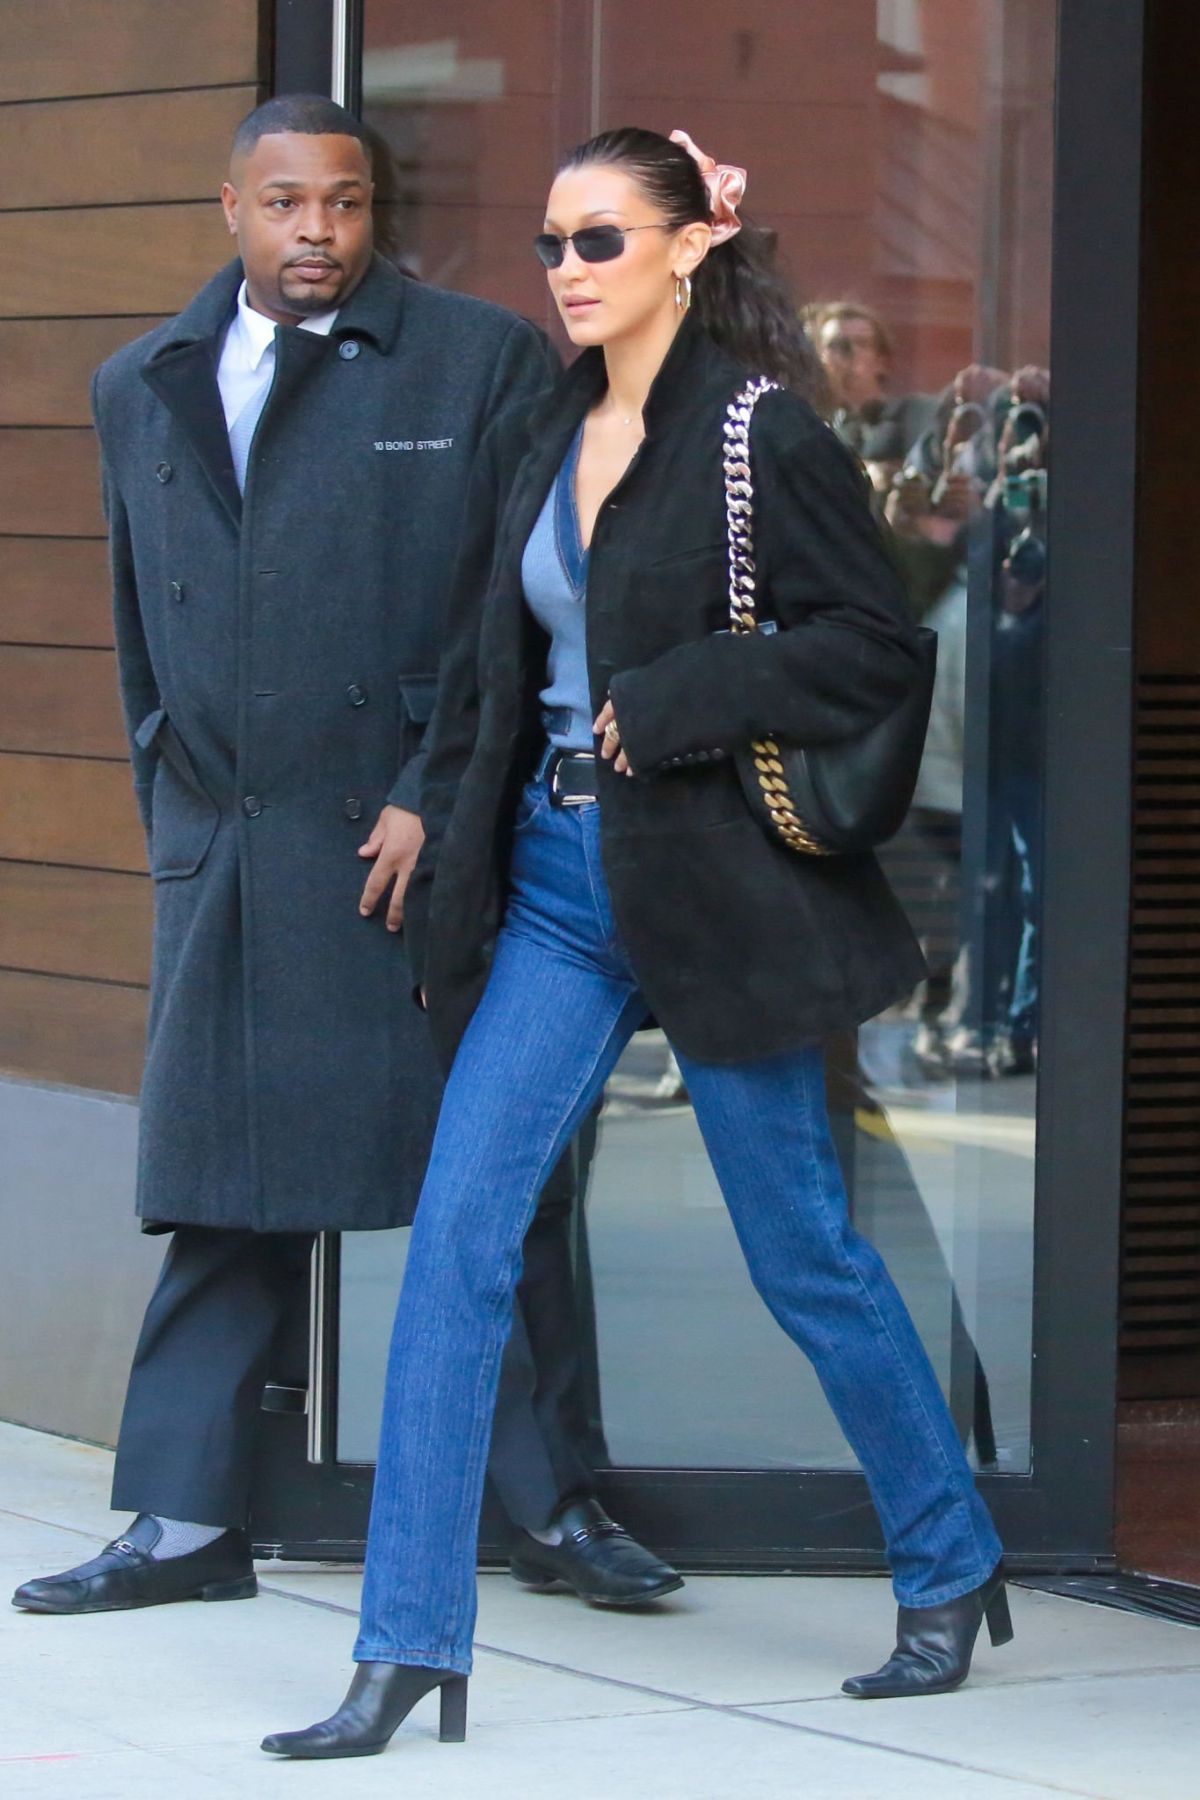 Bella Hadid in Blue V-Neck and Stella McCartney Bag in NYC 3